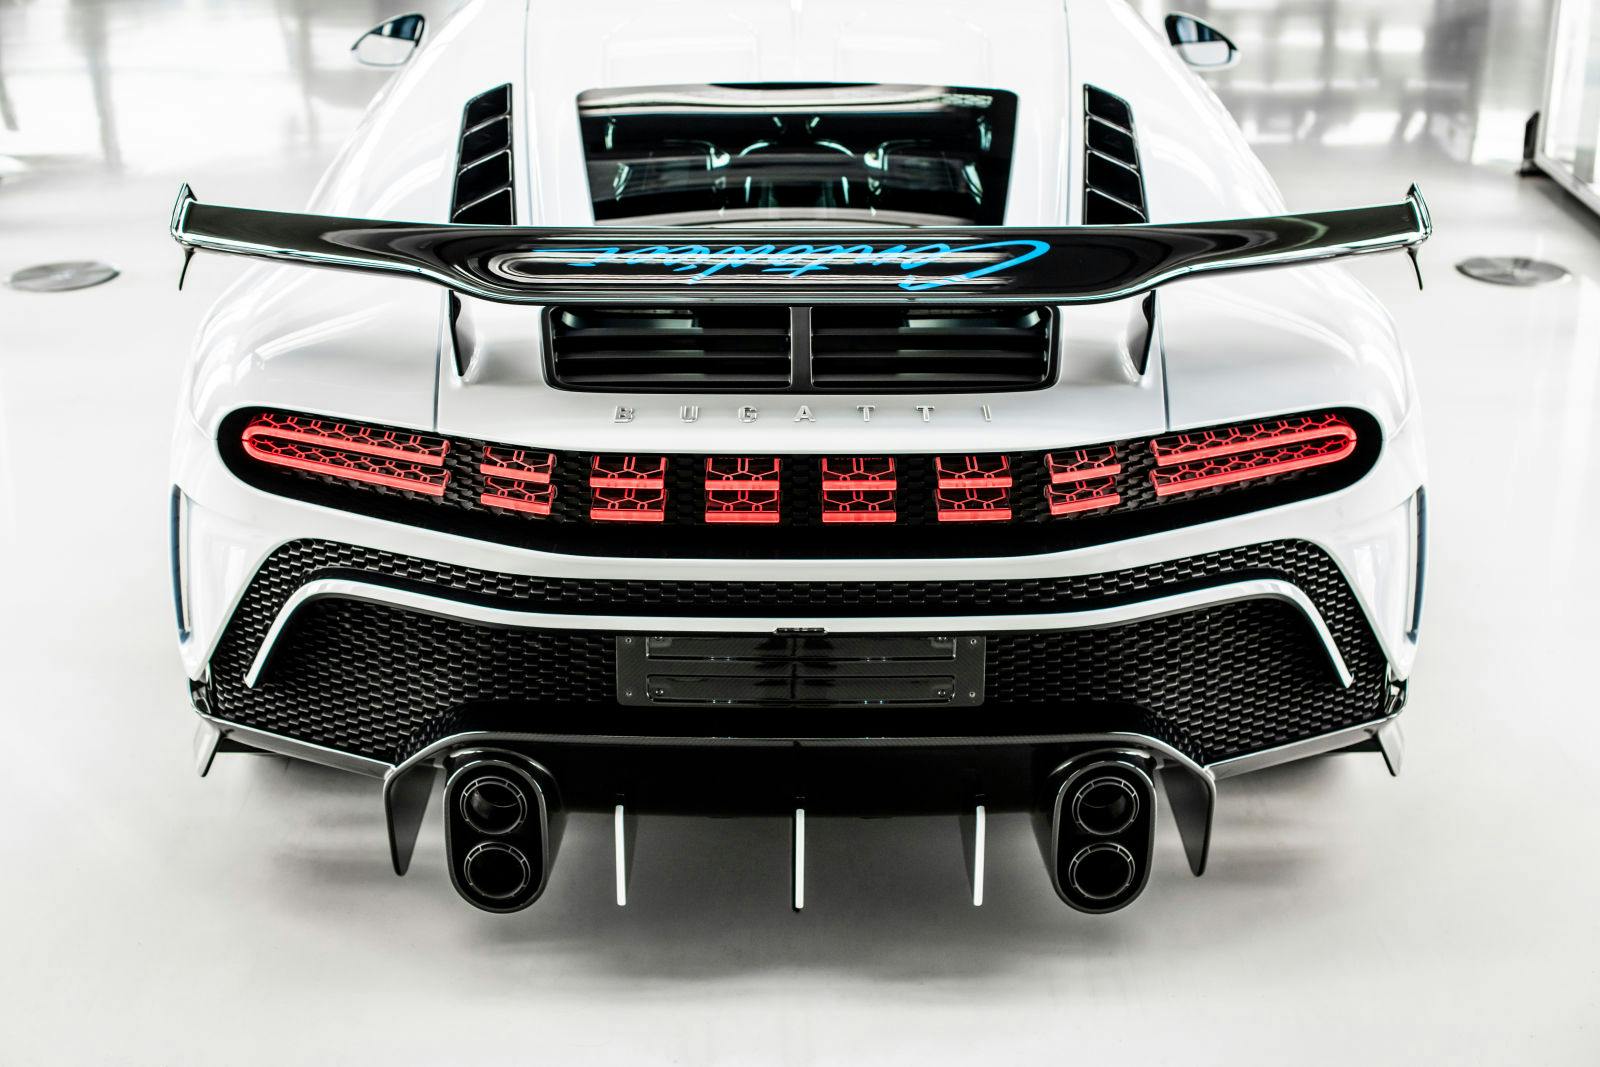 The rear wing of the Centodieci is reminiscent of that of the EB110.